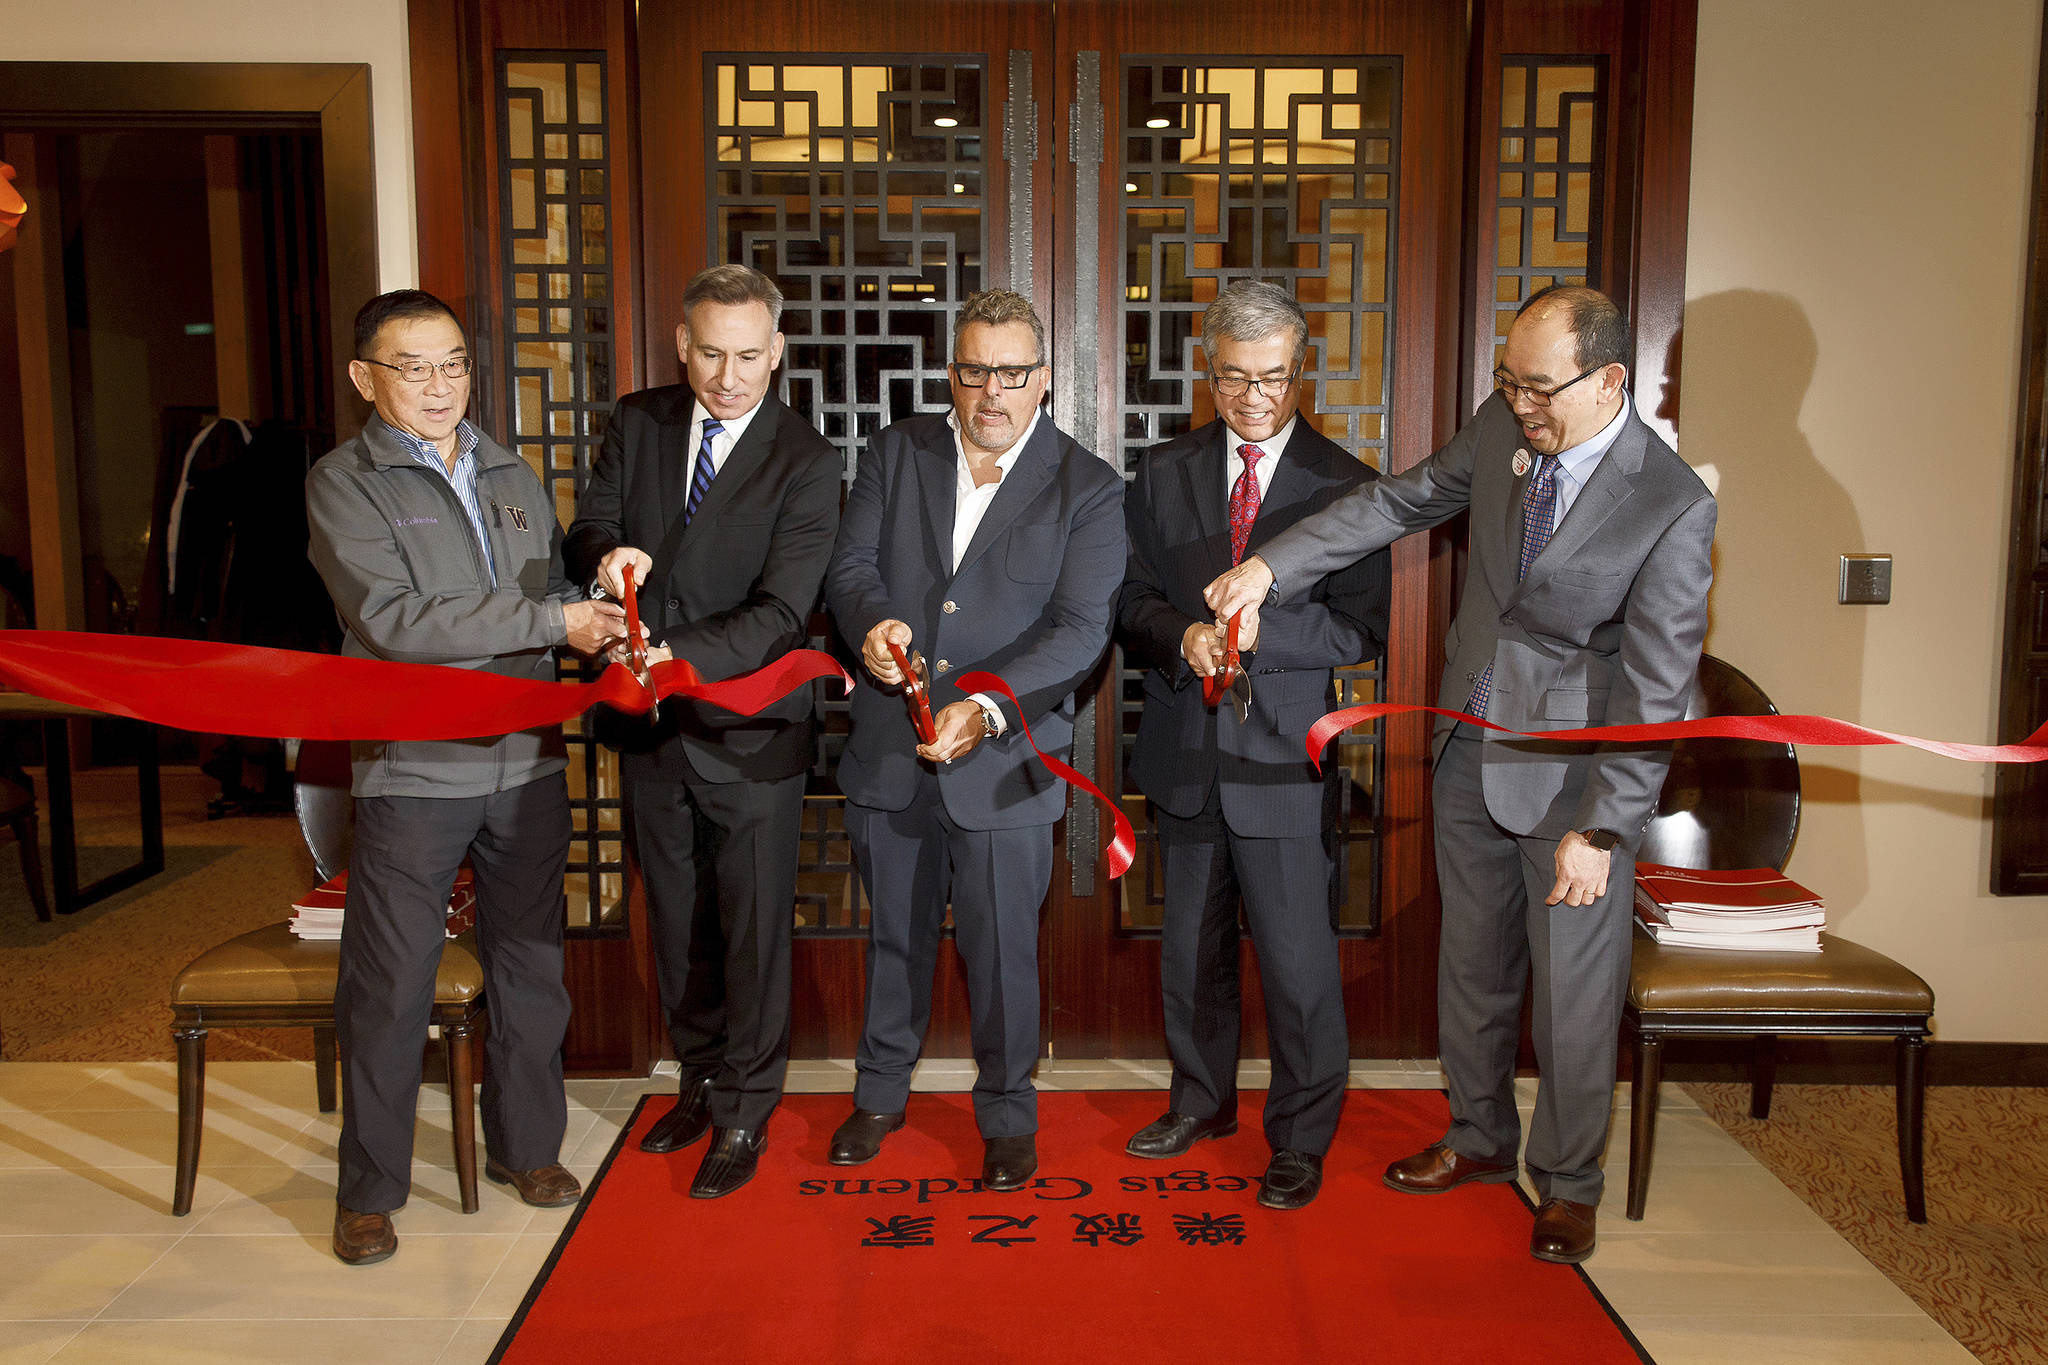 Aegis Living opens senior assisted living community celebrating Chinese culture